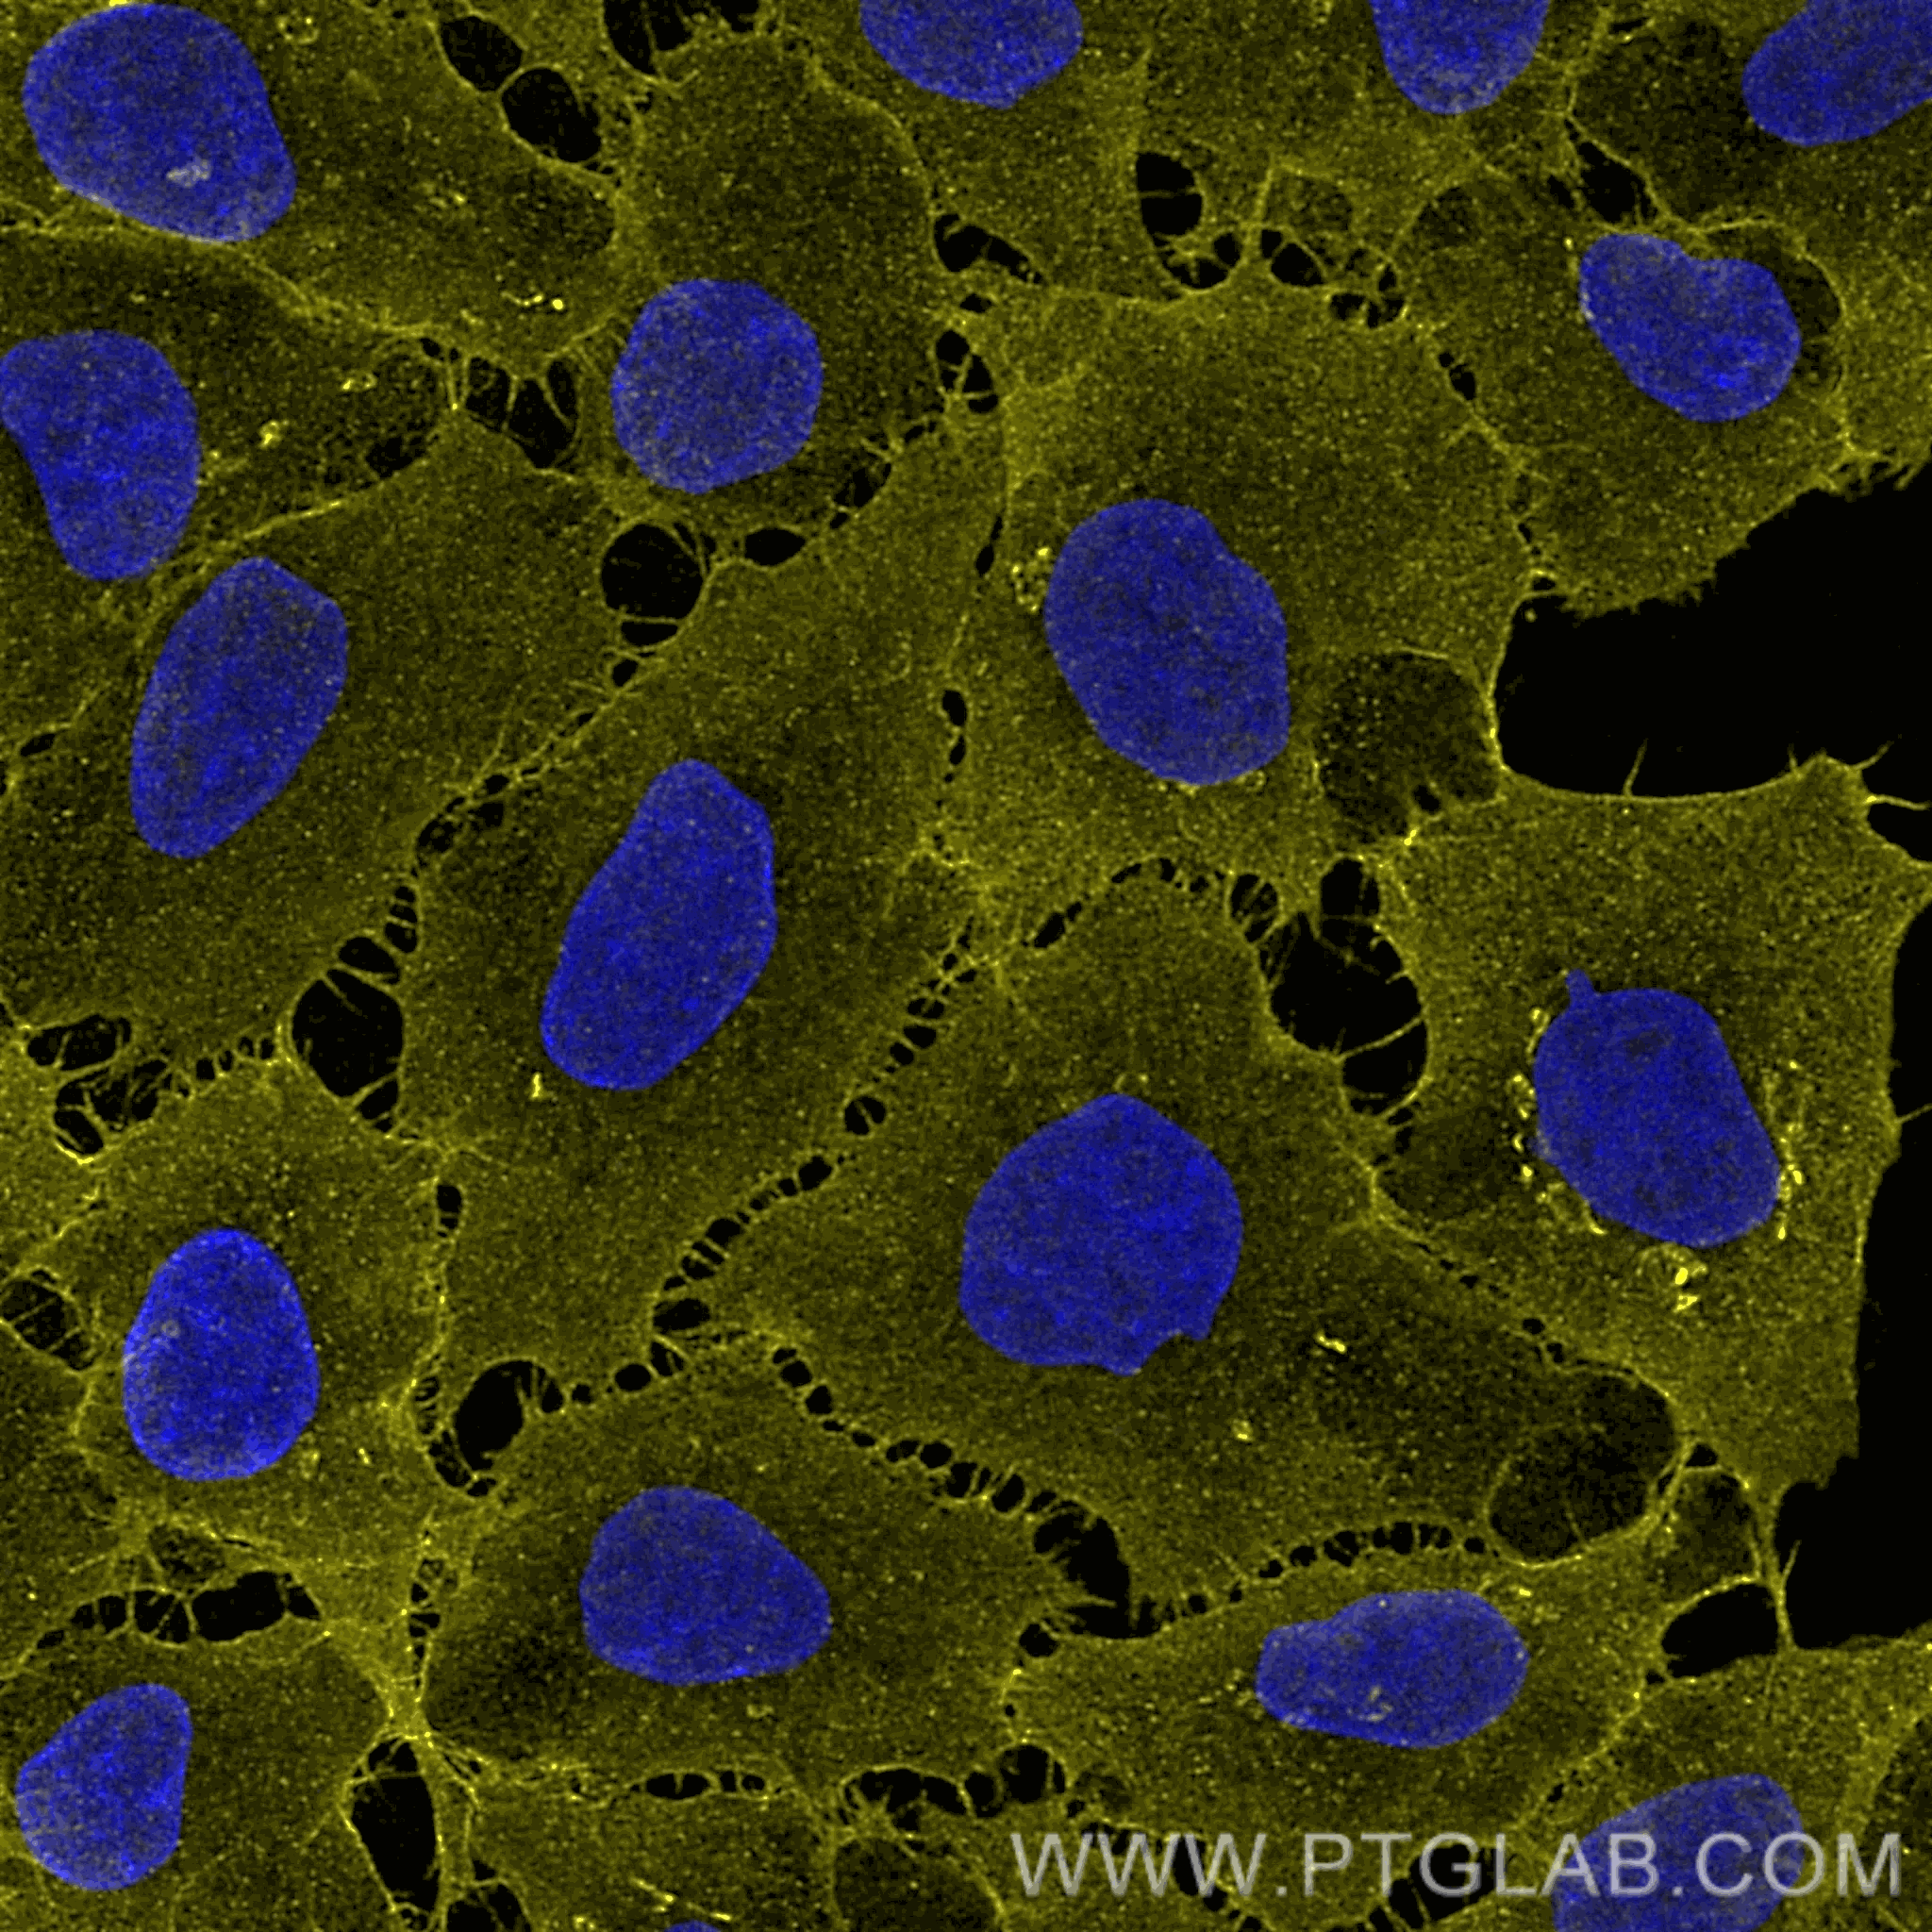 Immunofluorescence of HeLa: PFA-fixed HeLa cells were stained with anti-CD147 antibody labeled with FlexAble Biotin Antibody Labeling Kit for Mouse IgG1 (KFA027) and Streptavidin-ATTO594​ (yellow). Nuclei are stained with DAPI (blue).  Confocal images were acquired with a 100x oil objective and post-processed. Images were recorded at the Core Facility Bioimaging at the Biomedical Center, LMU Munich.